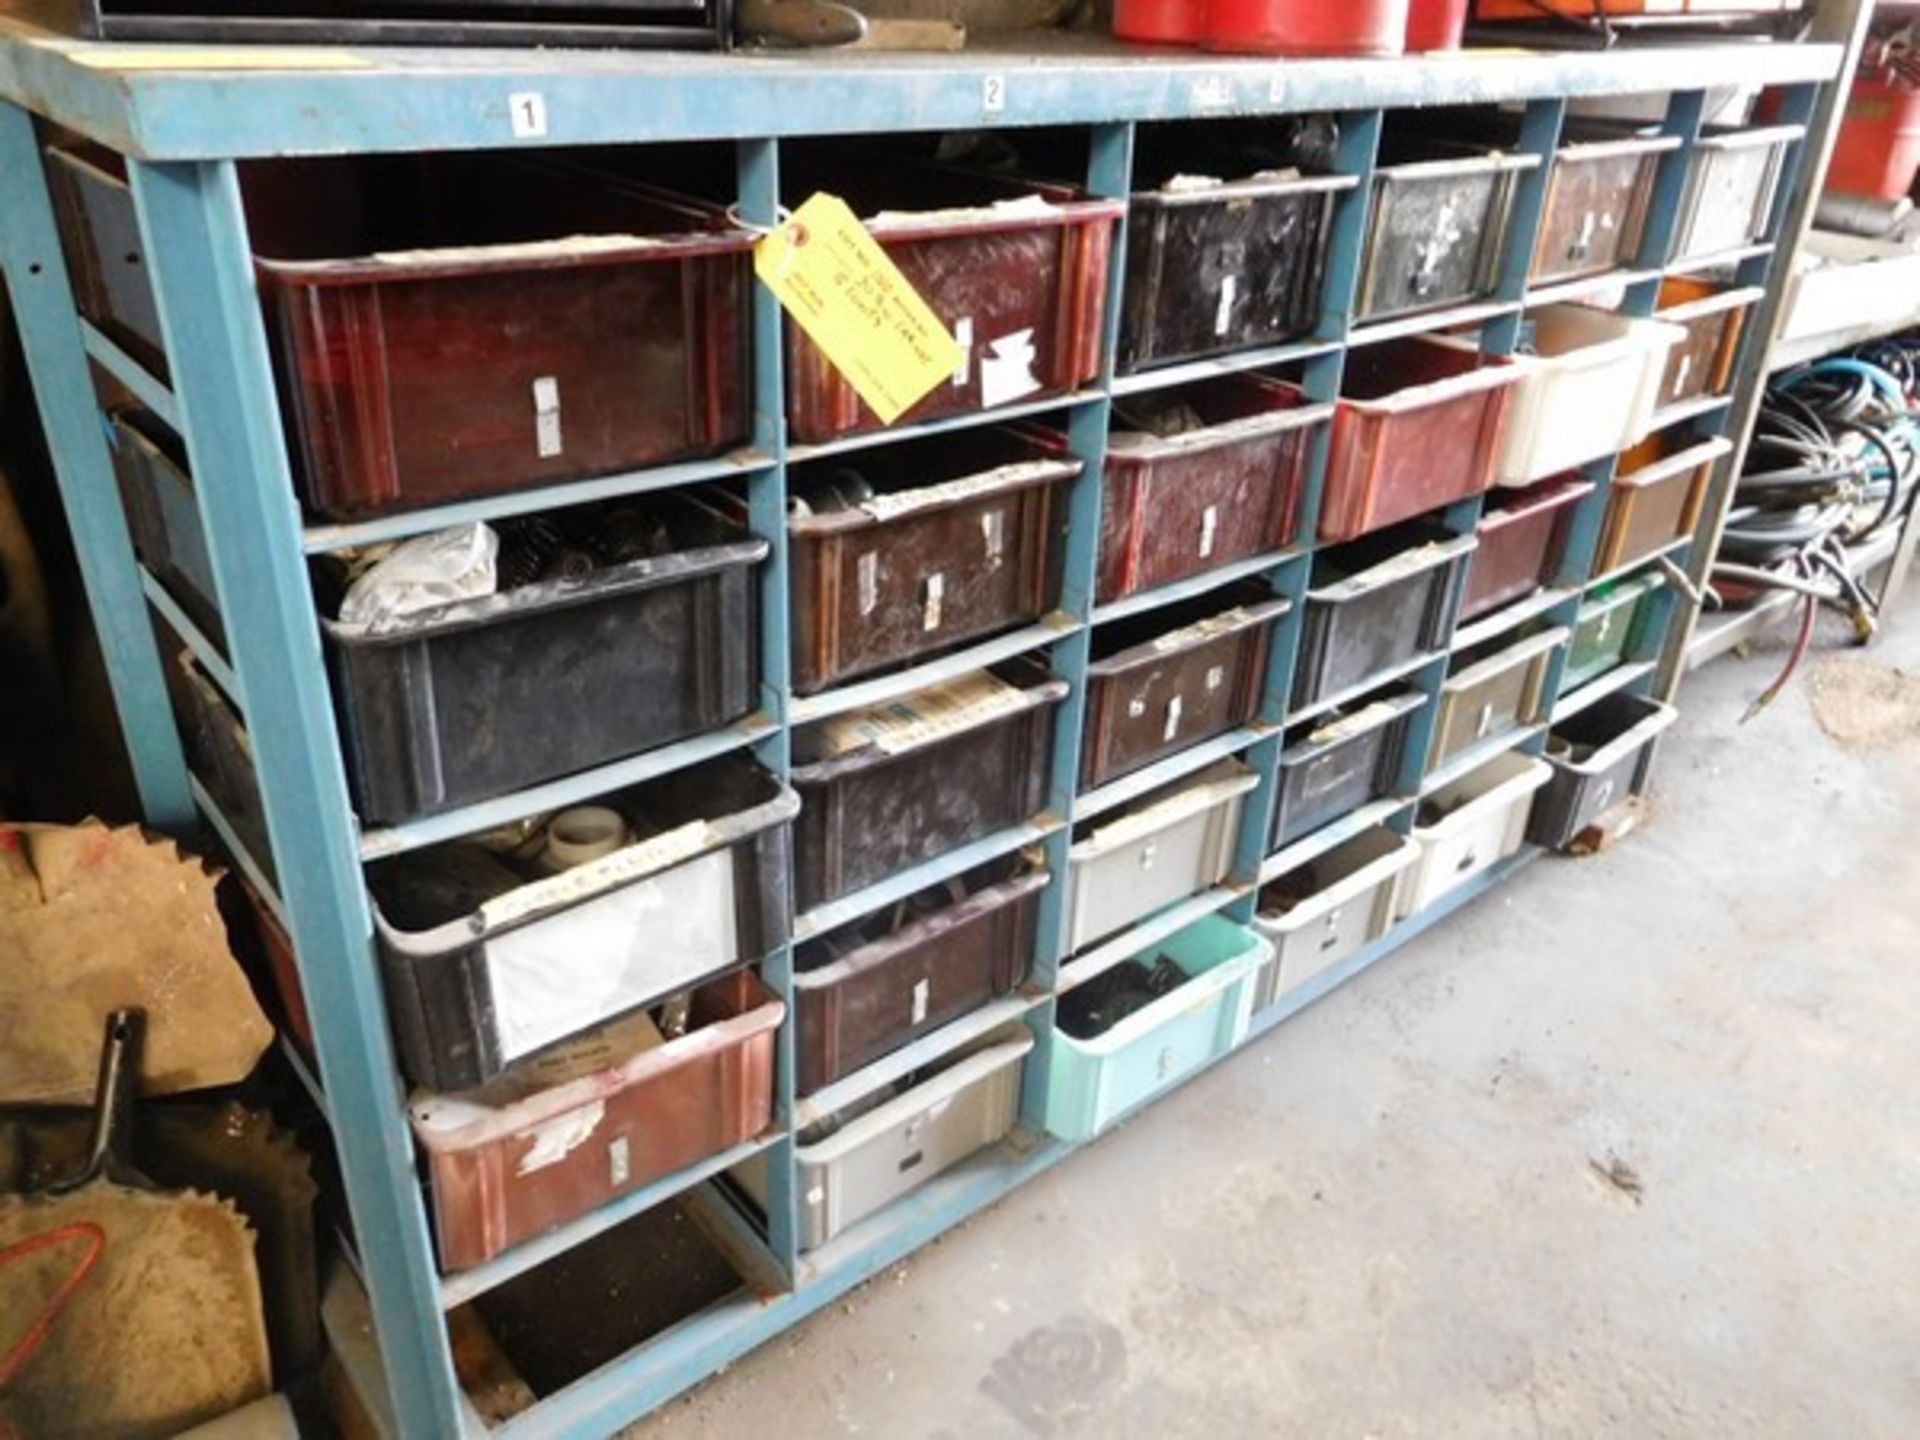 30 Bin Cabinet and Contents